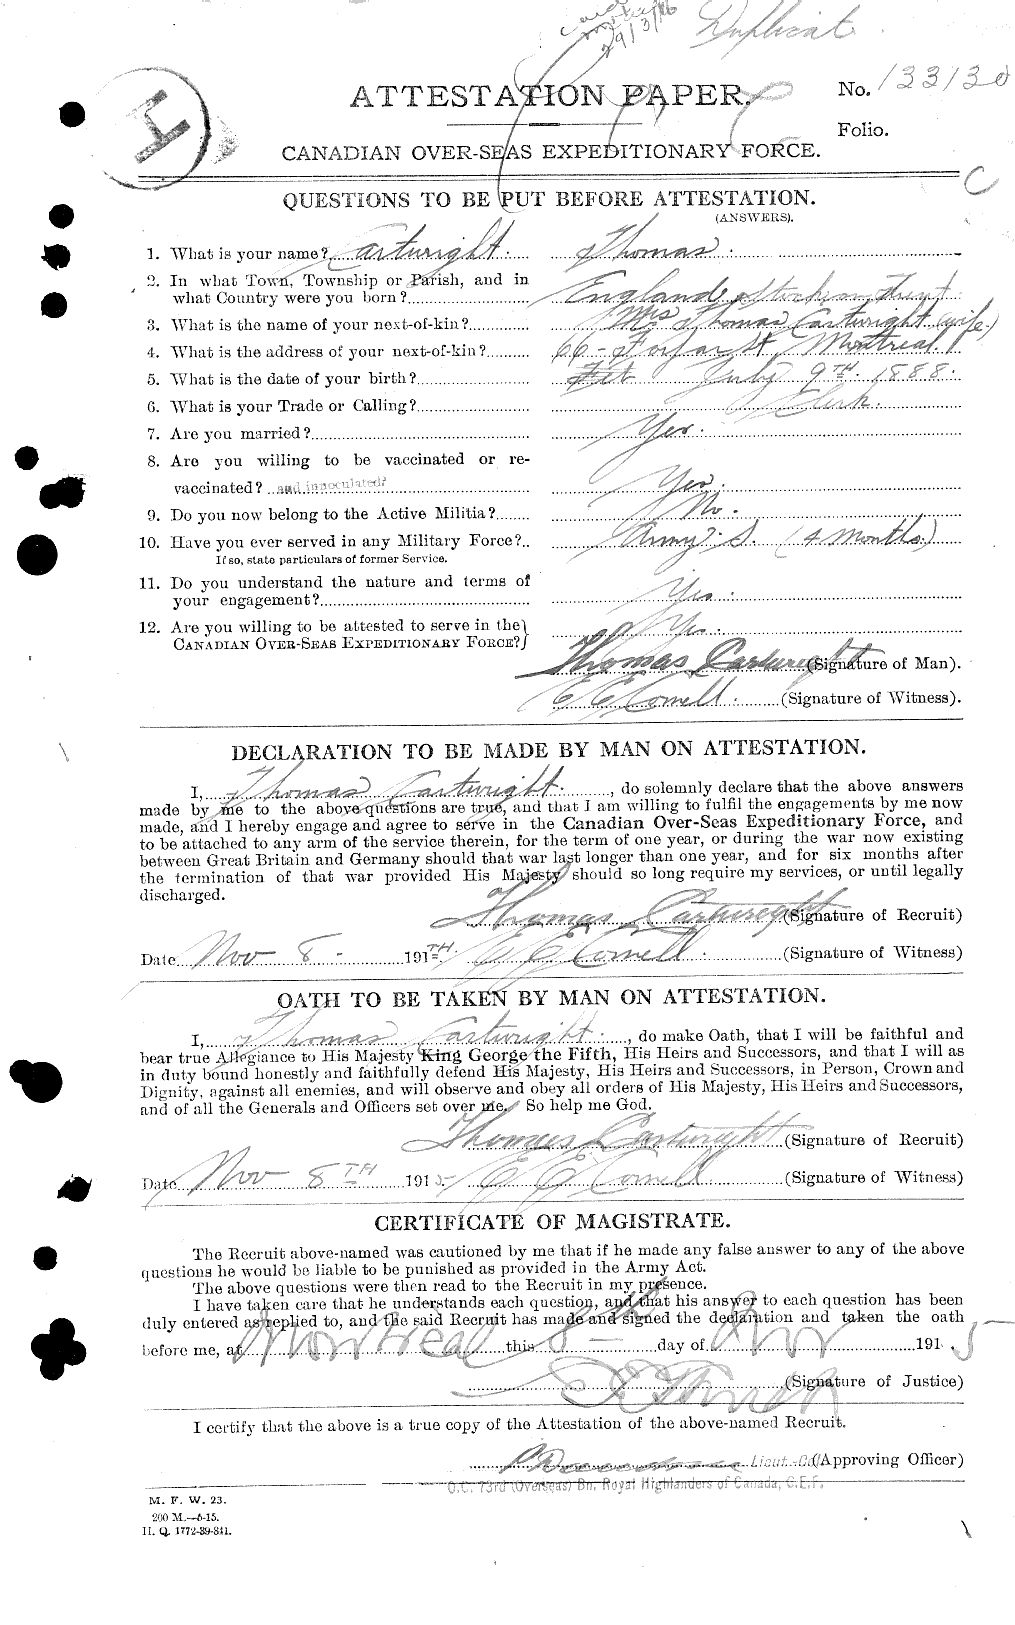 Personnel Records of the First World War - CEF 011624a